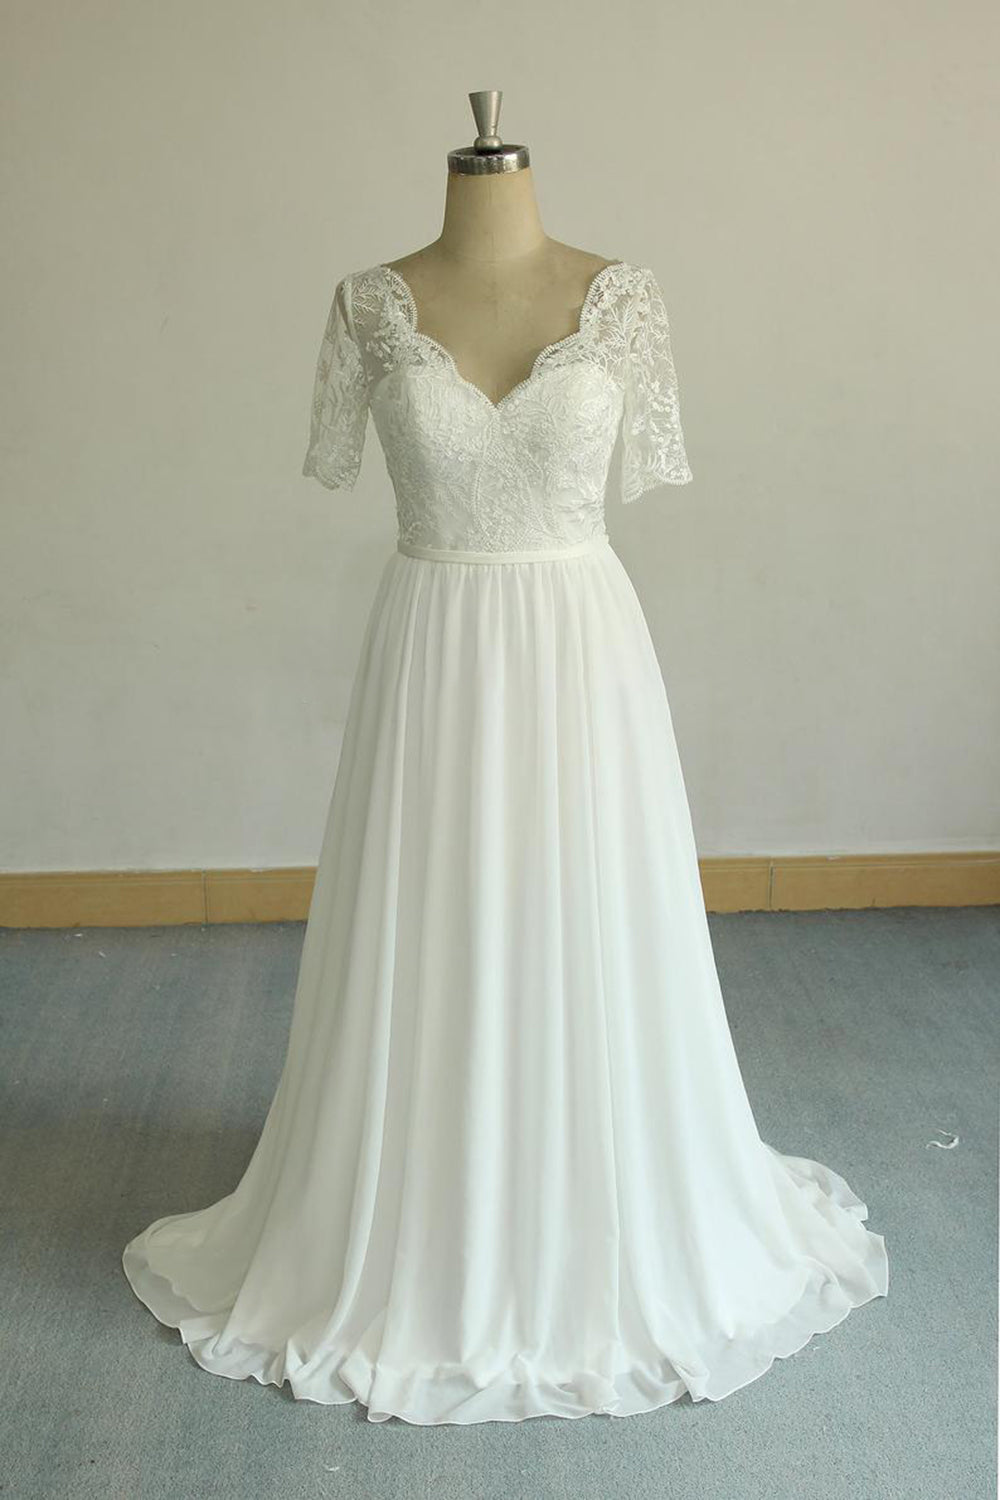 Affordable Halfsleeves V-neck Chiffon Wedding Dresses White A-line Ruffles Bridal Gowns Online-27dress